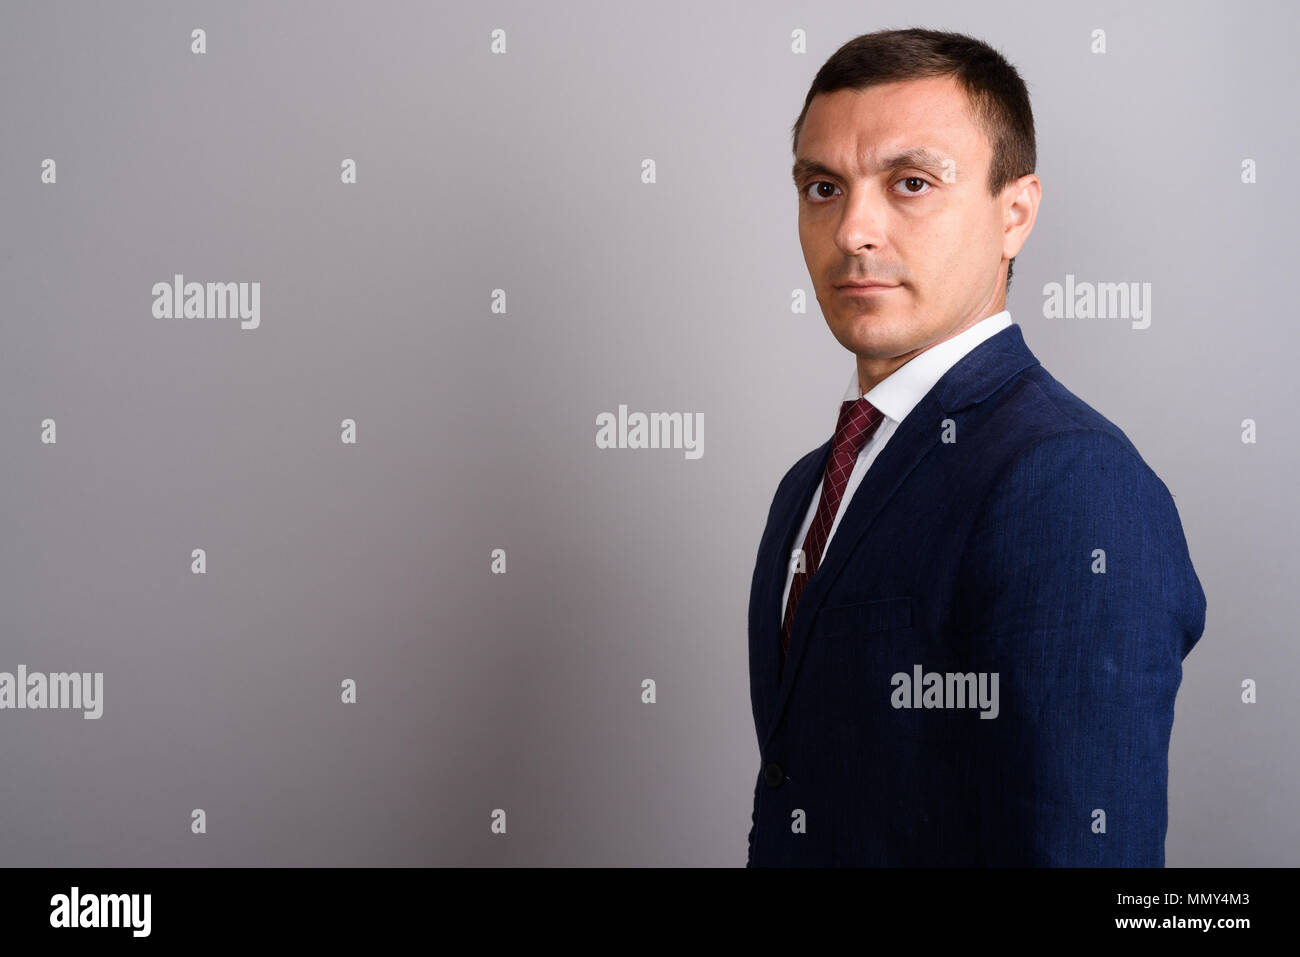 Businessman wearing suit against gray background Stock Photo